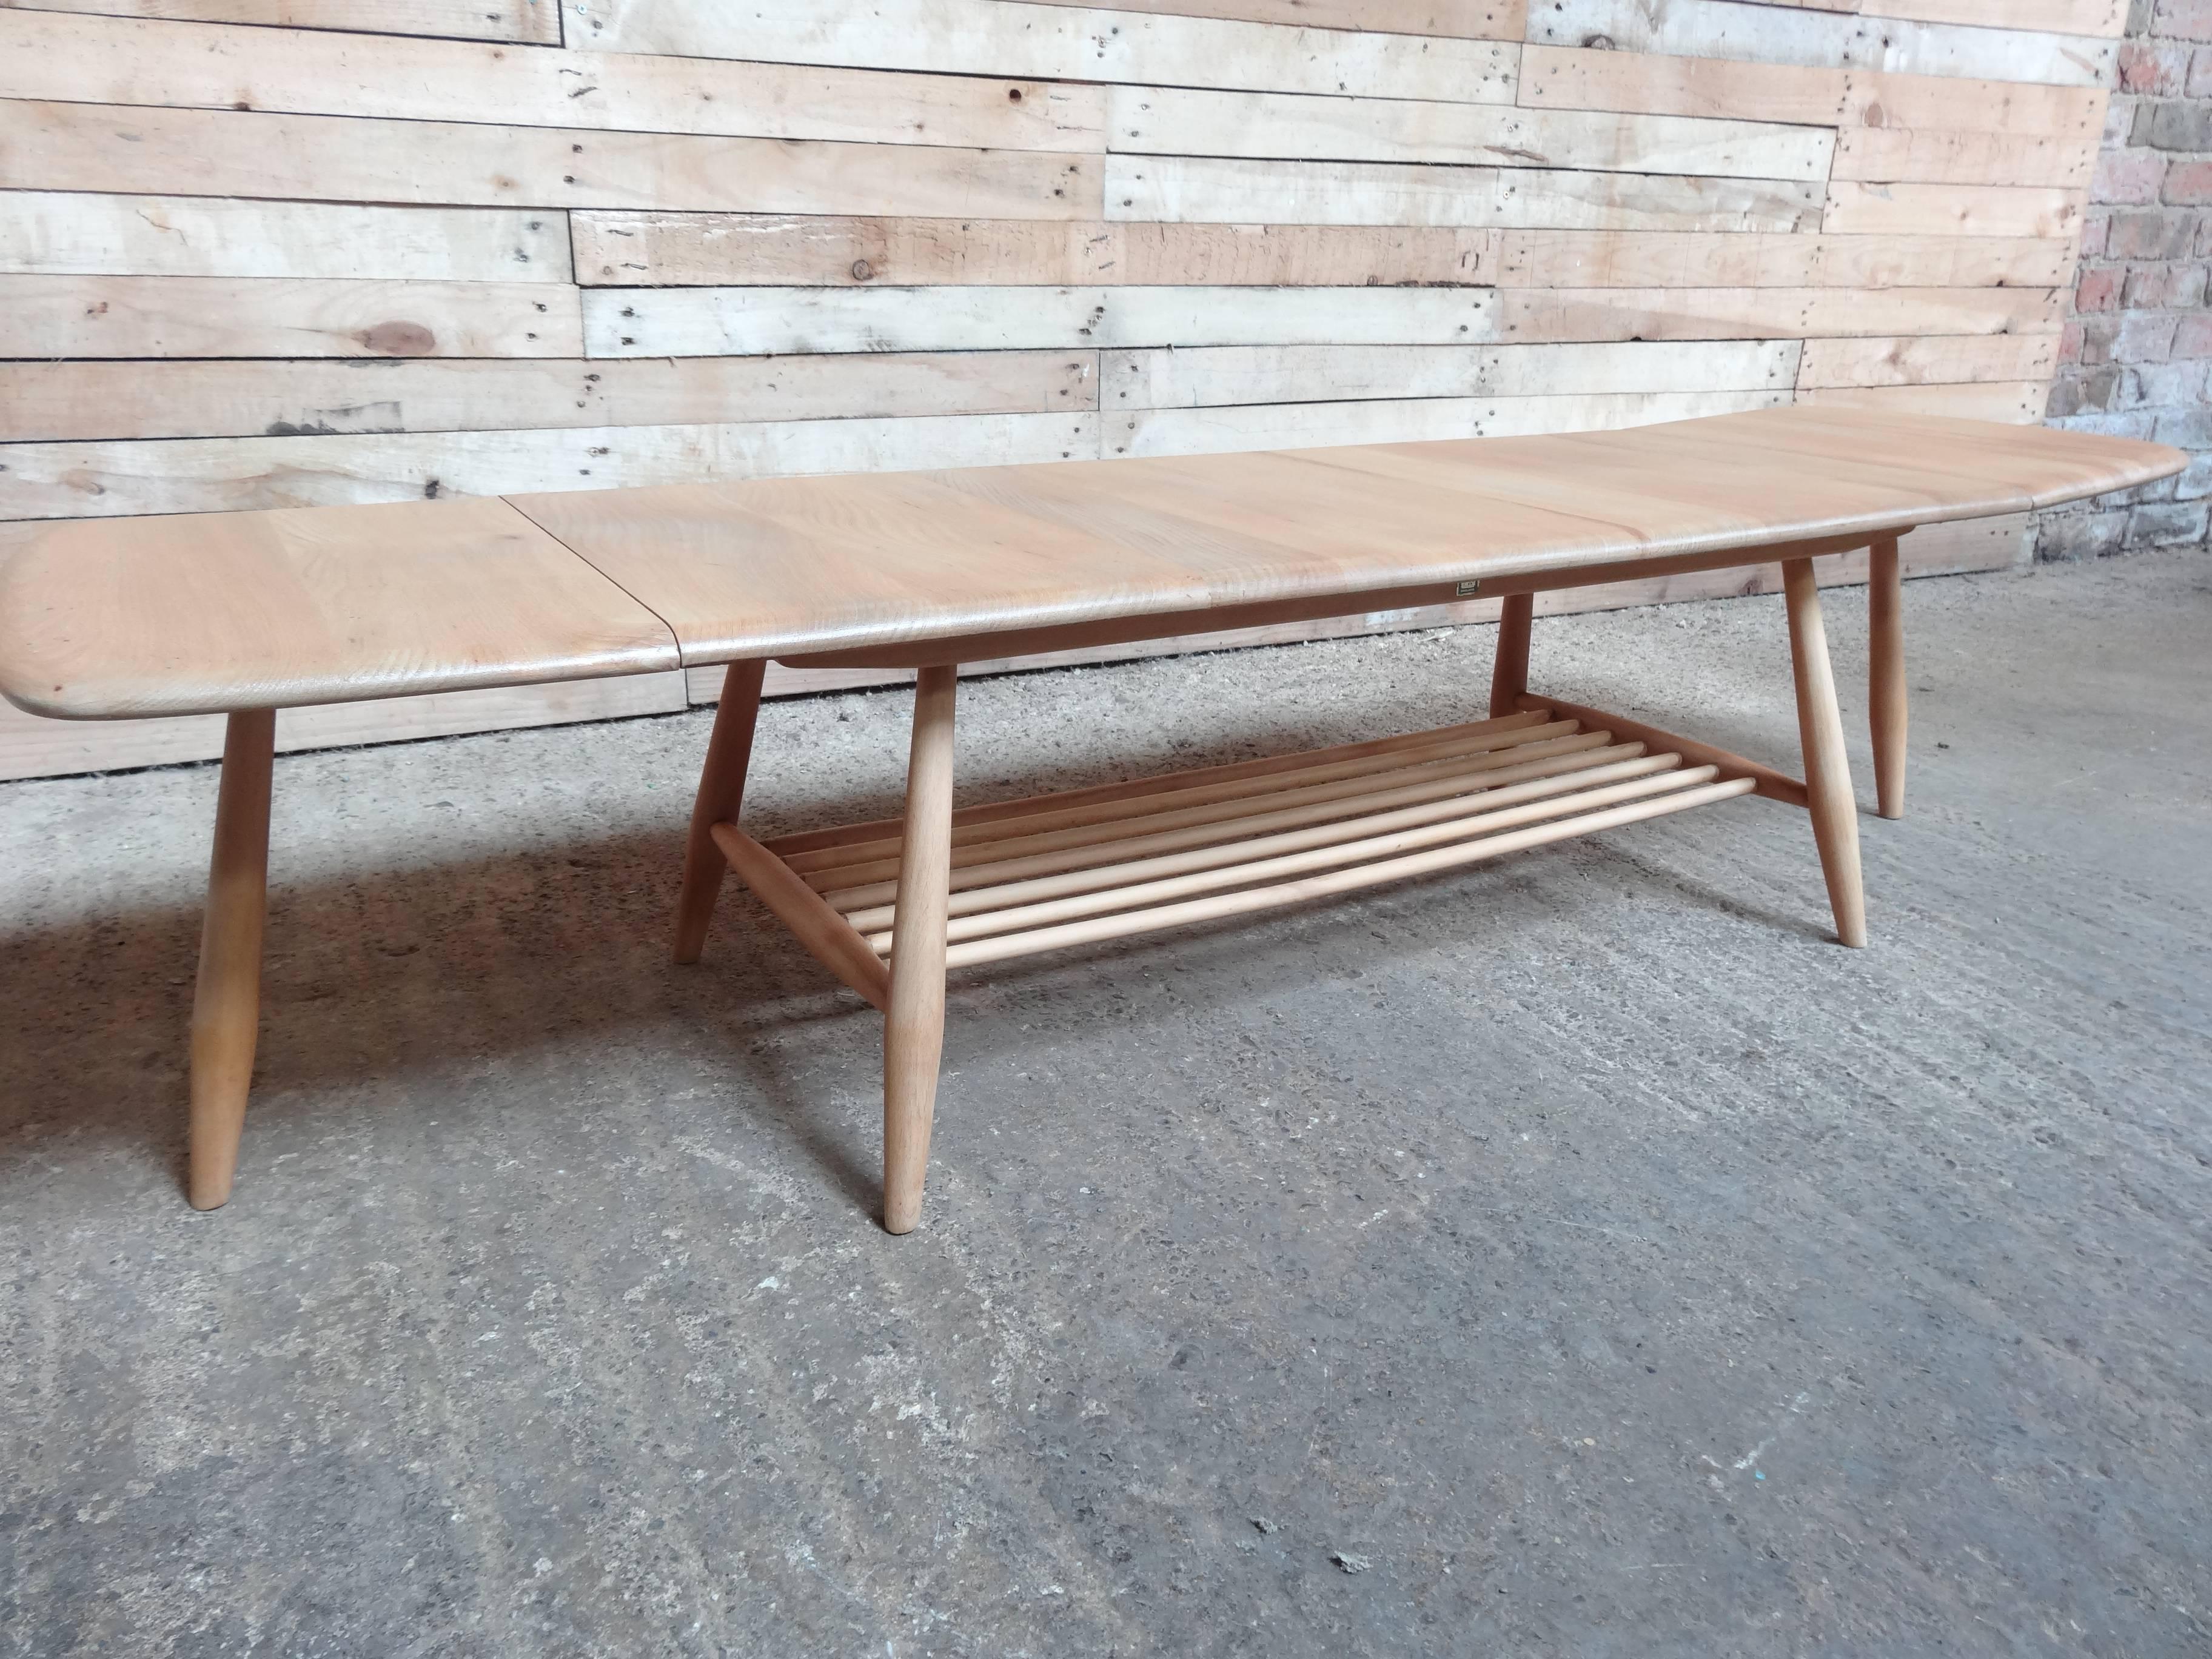 Fantastic coffee Ercol table in mint condition, the table is made out of solid beech wood and is in mint condition. 

Measures: Height 36cm, depth 45cm, width 105/133/161 cm.

 